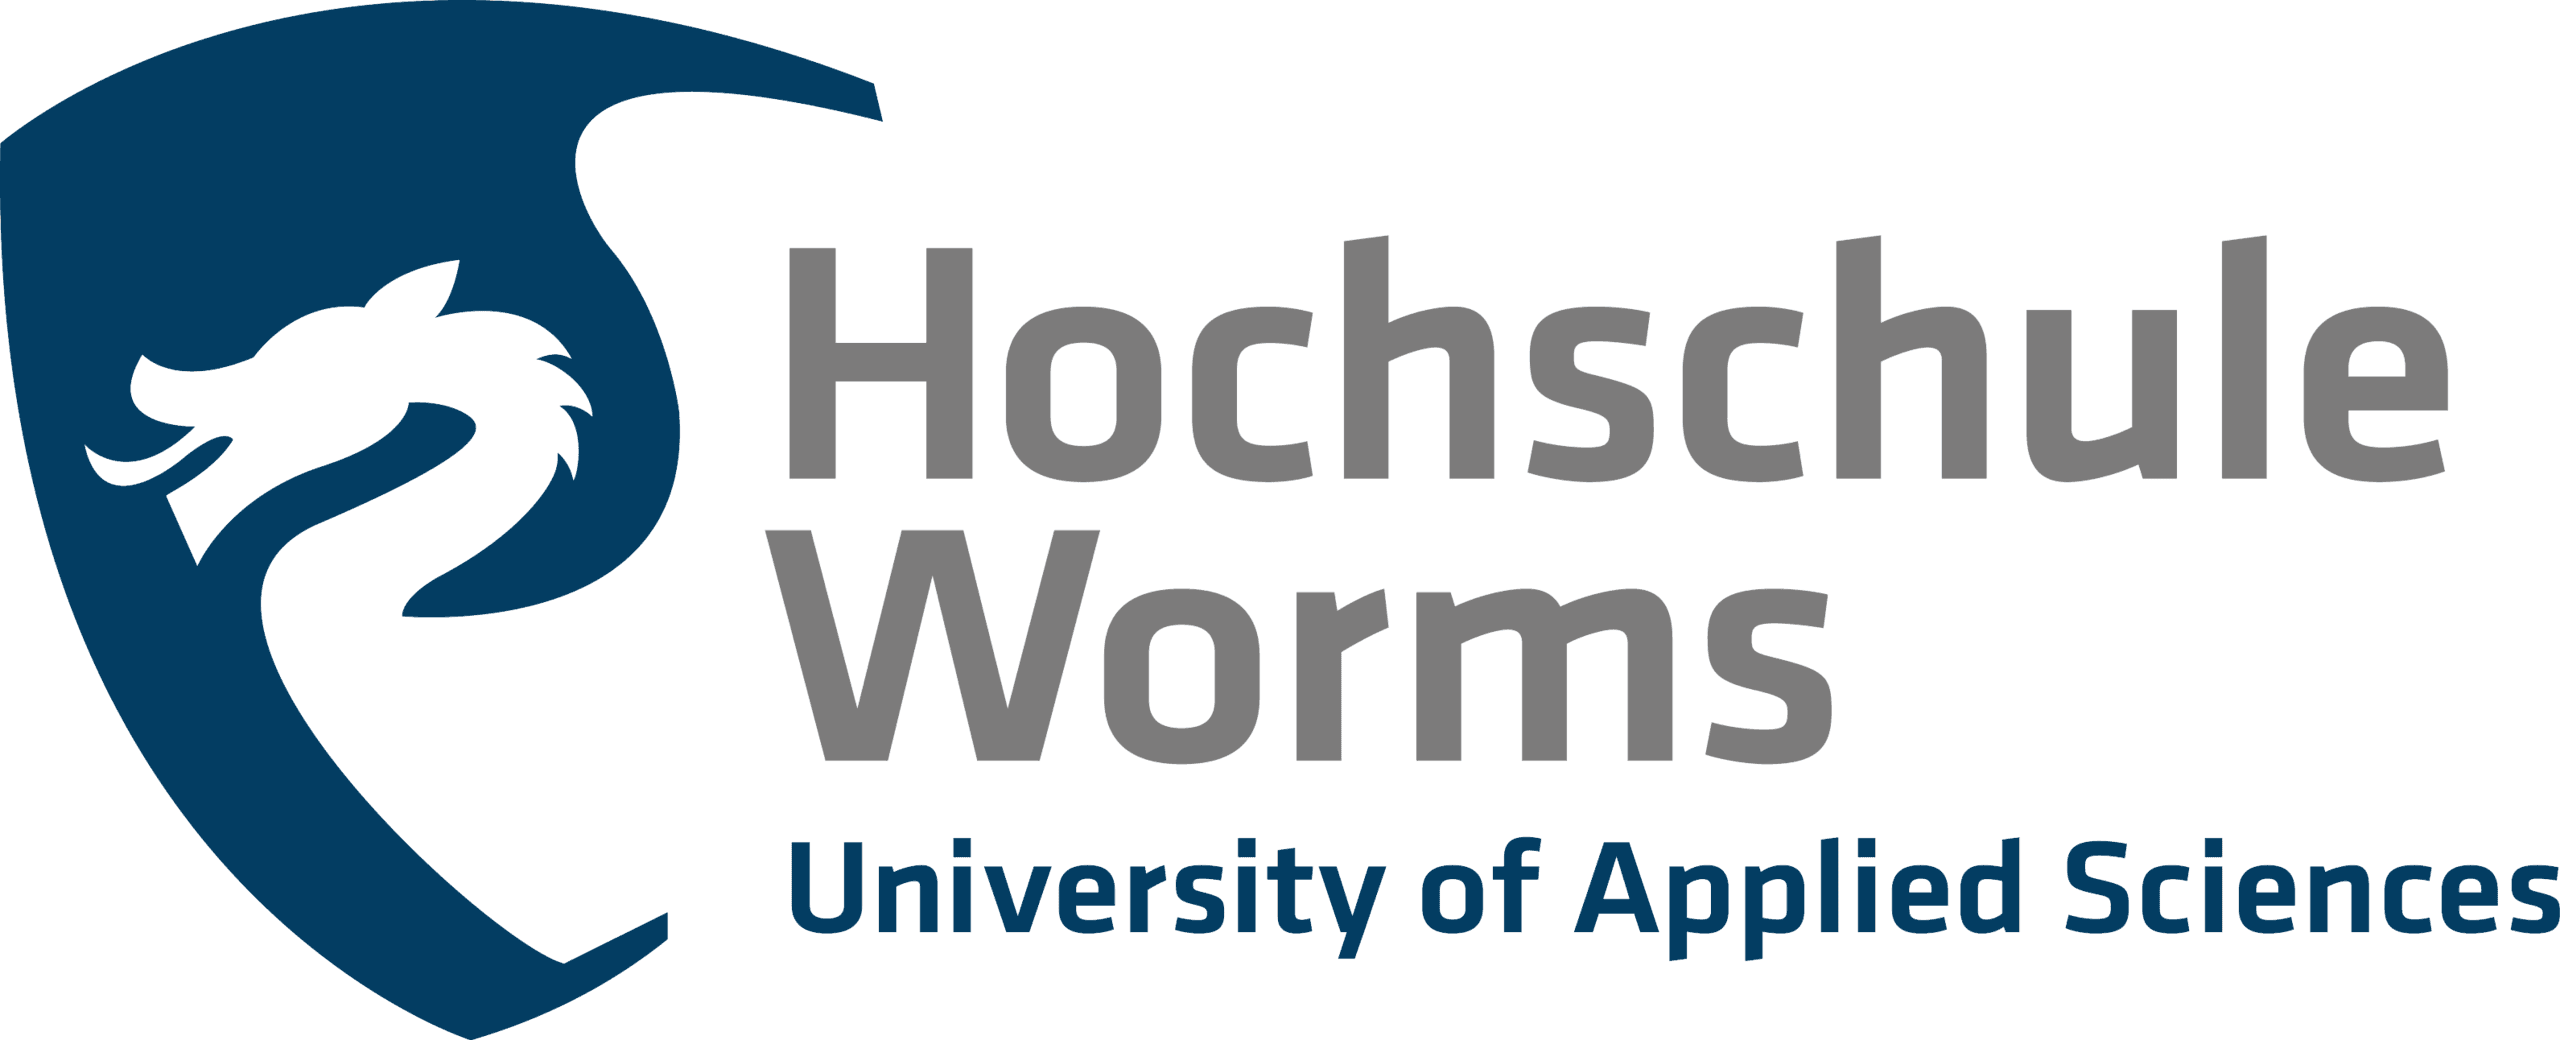 worms-university-of-applied-sciences-0e40000901-cover-picture